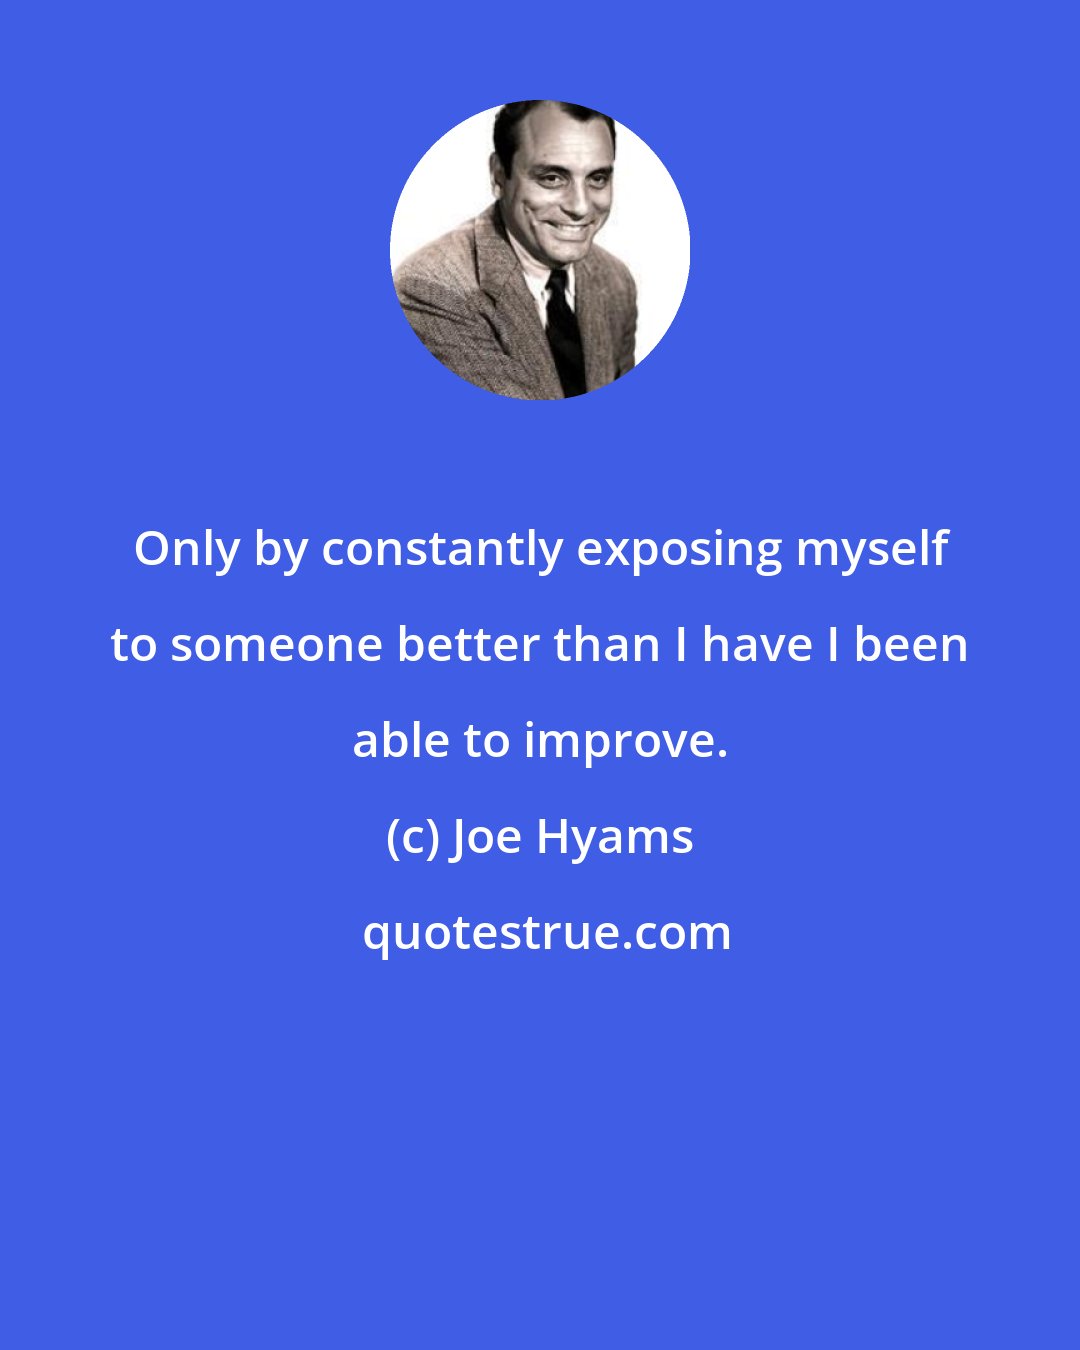 Joe Hyams: Only by constantly exposing myself to someone better than I have I been able to improve.